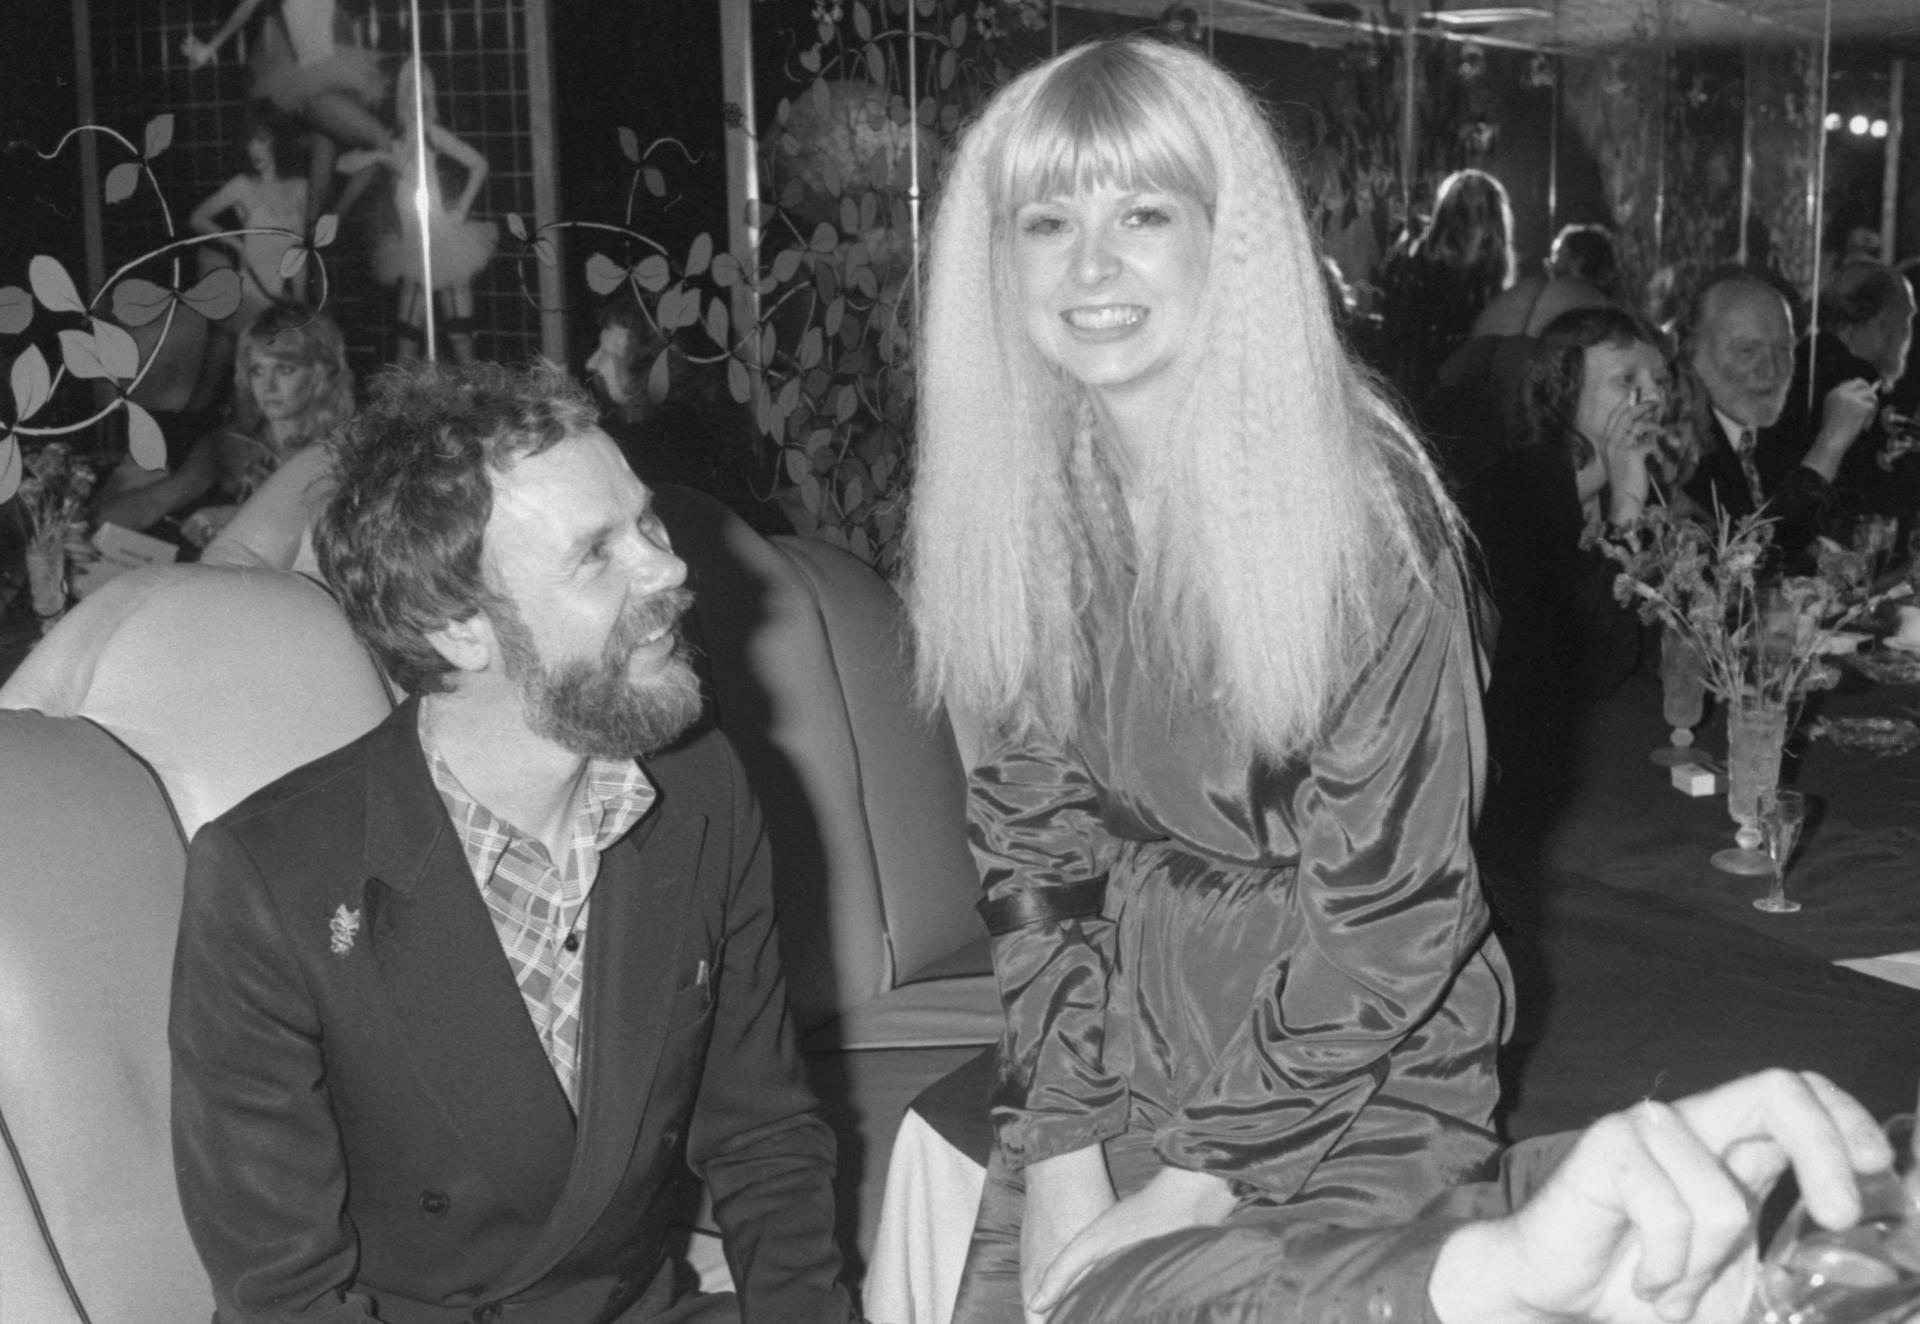 North-east designer Bill Gibb at the premiere of Xanadu in the 1970s.